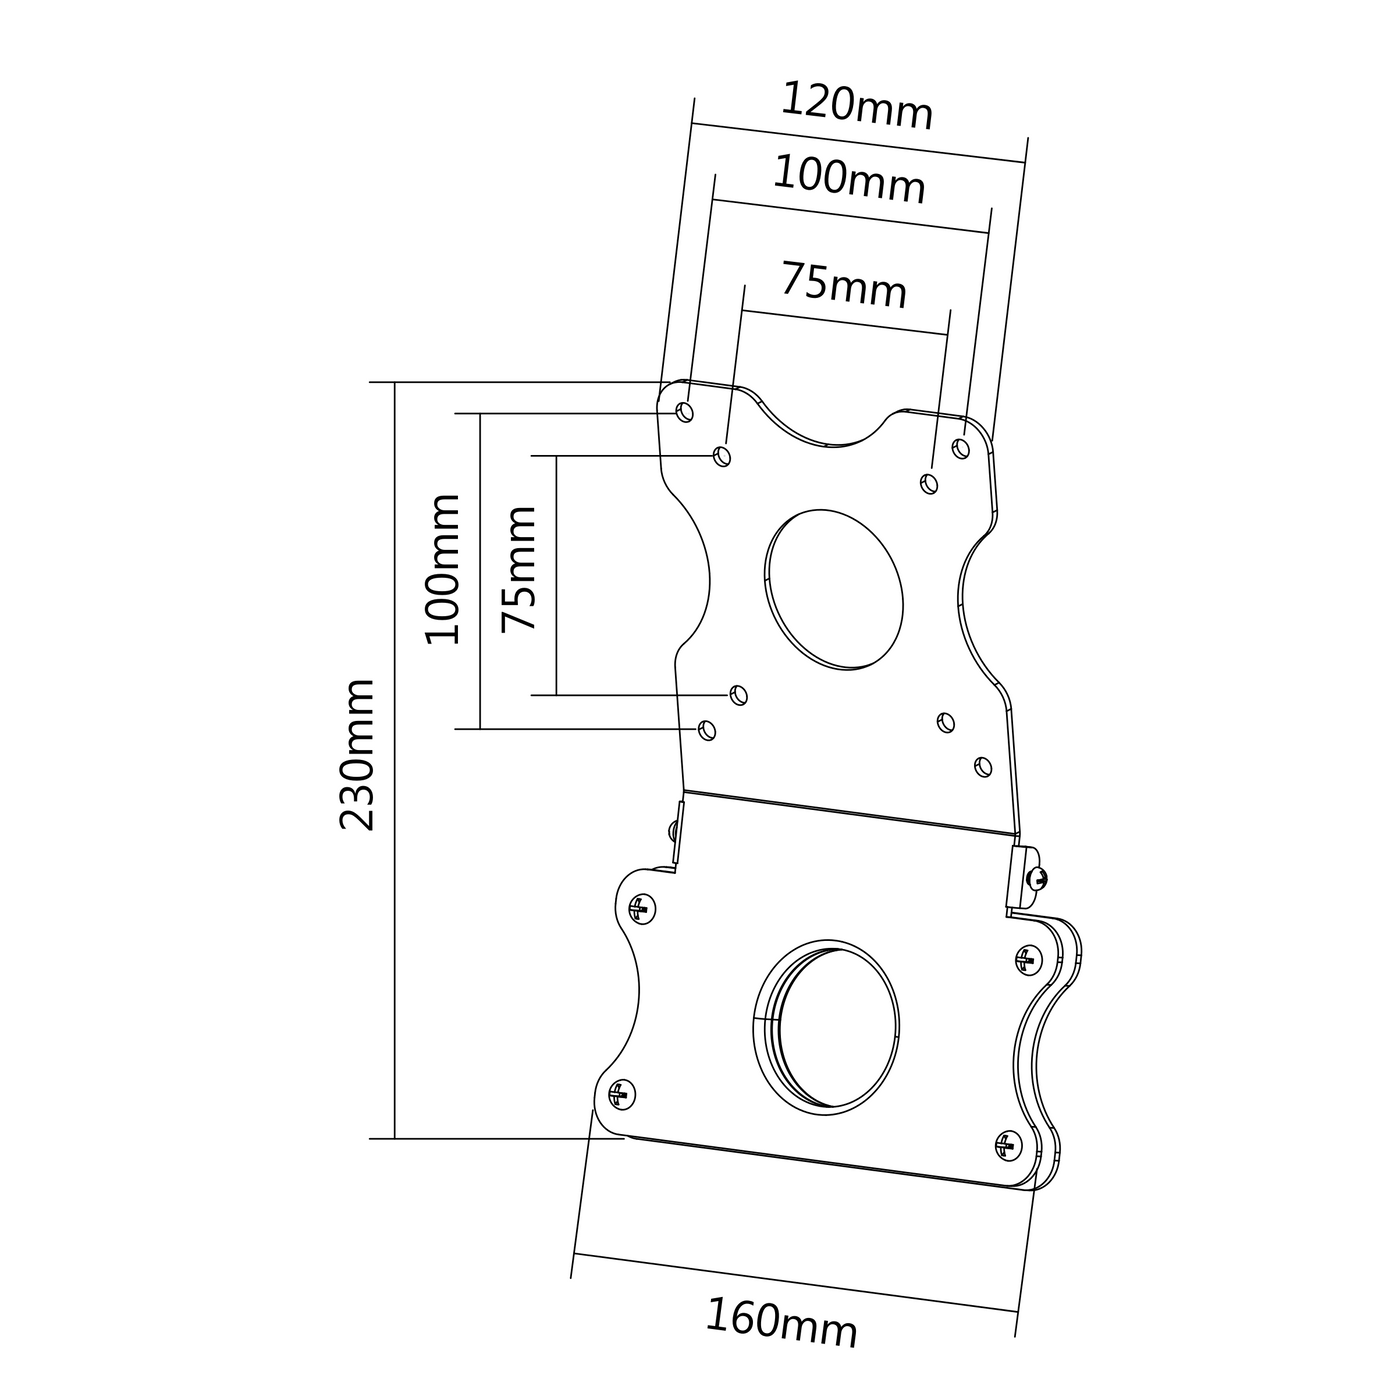 Blueprint specifications and measurements of iMac VESA plate adapter.